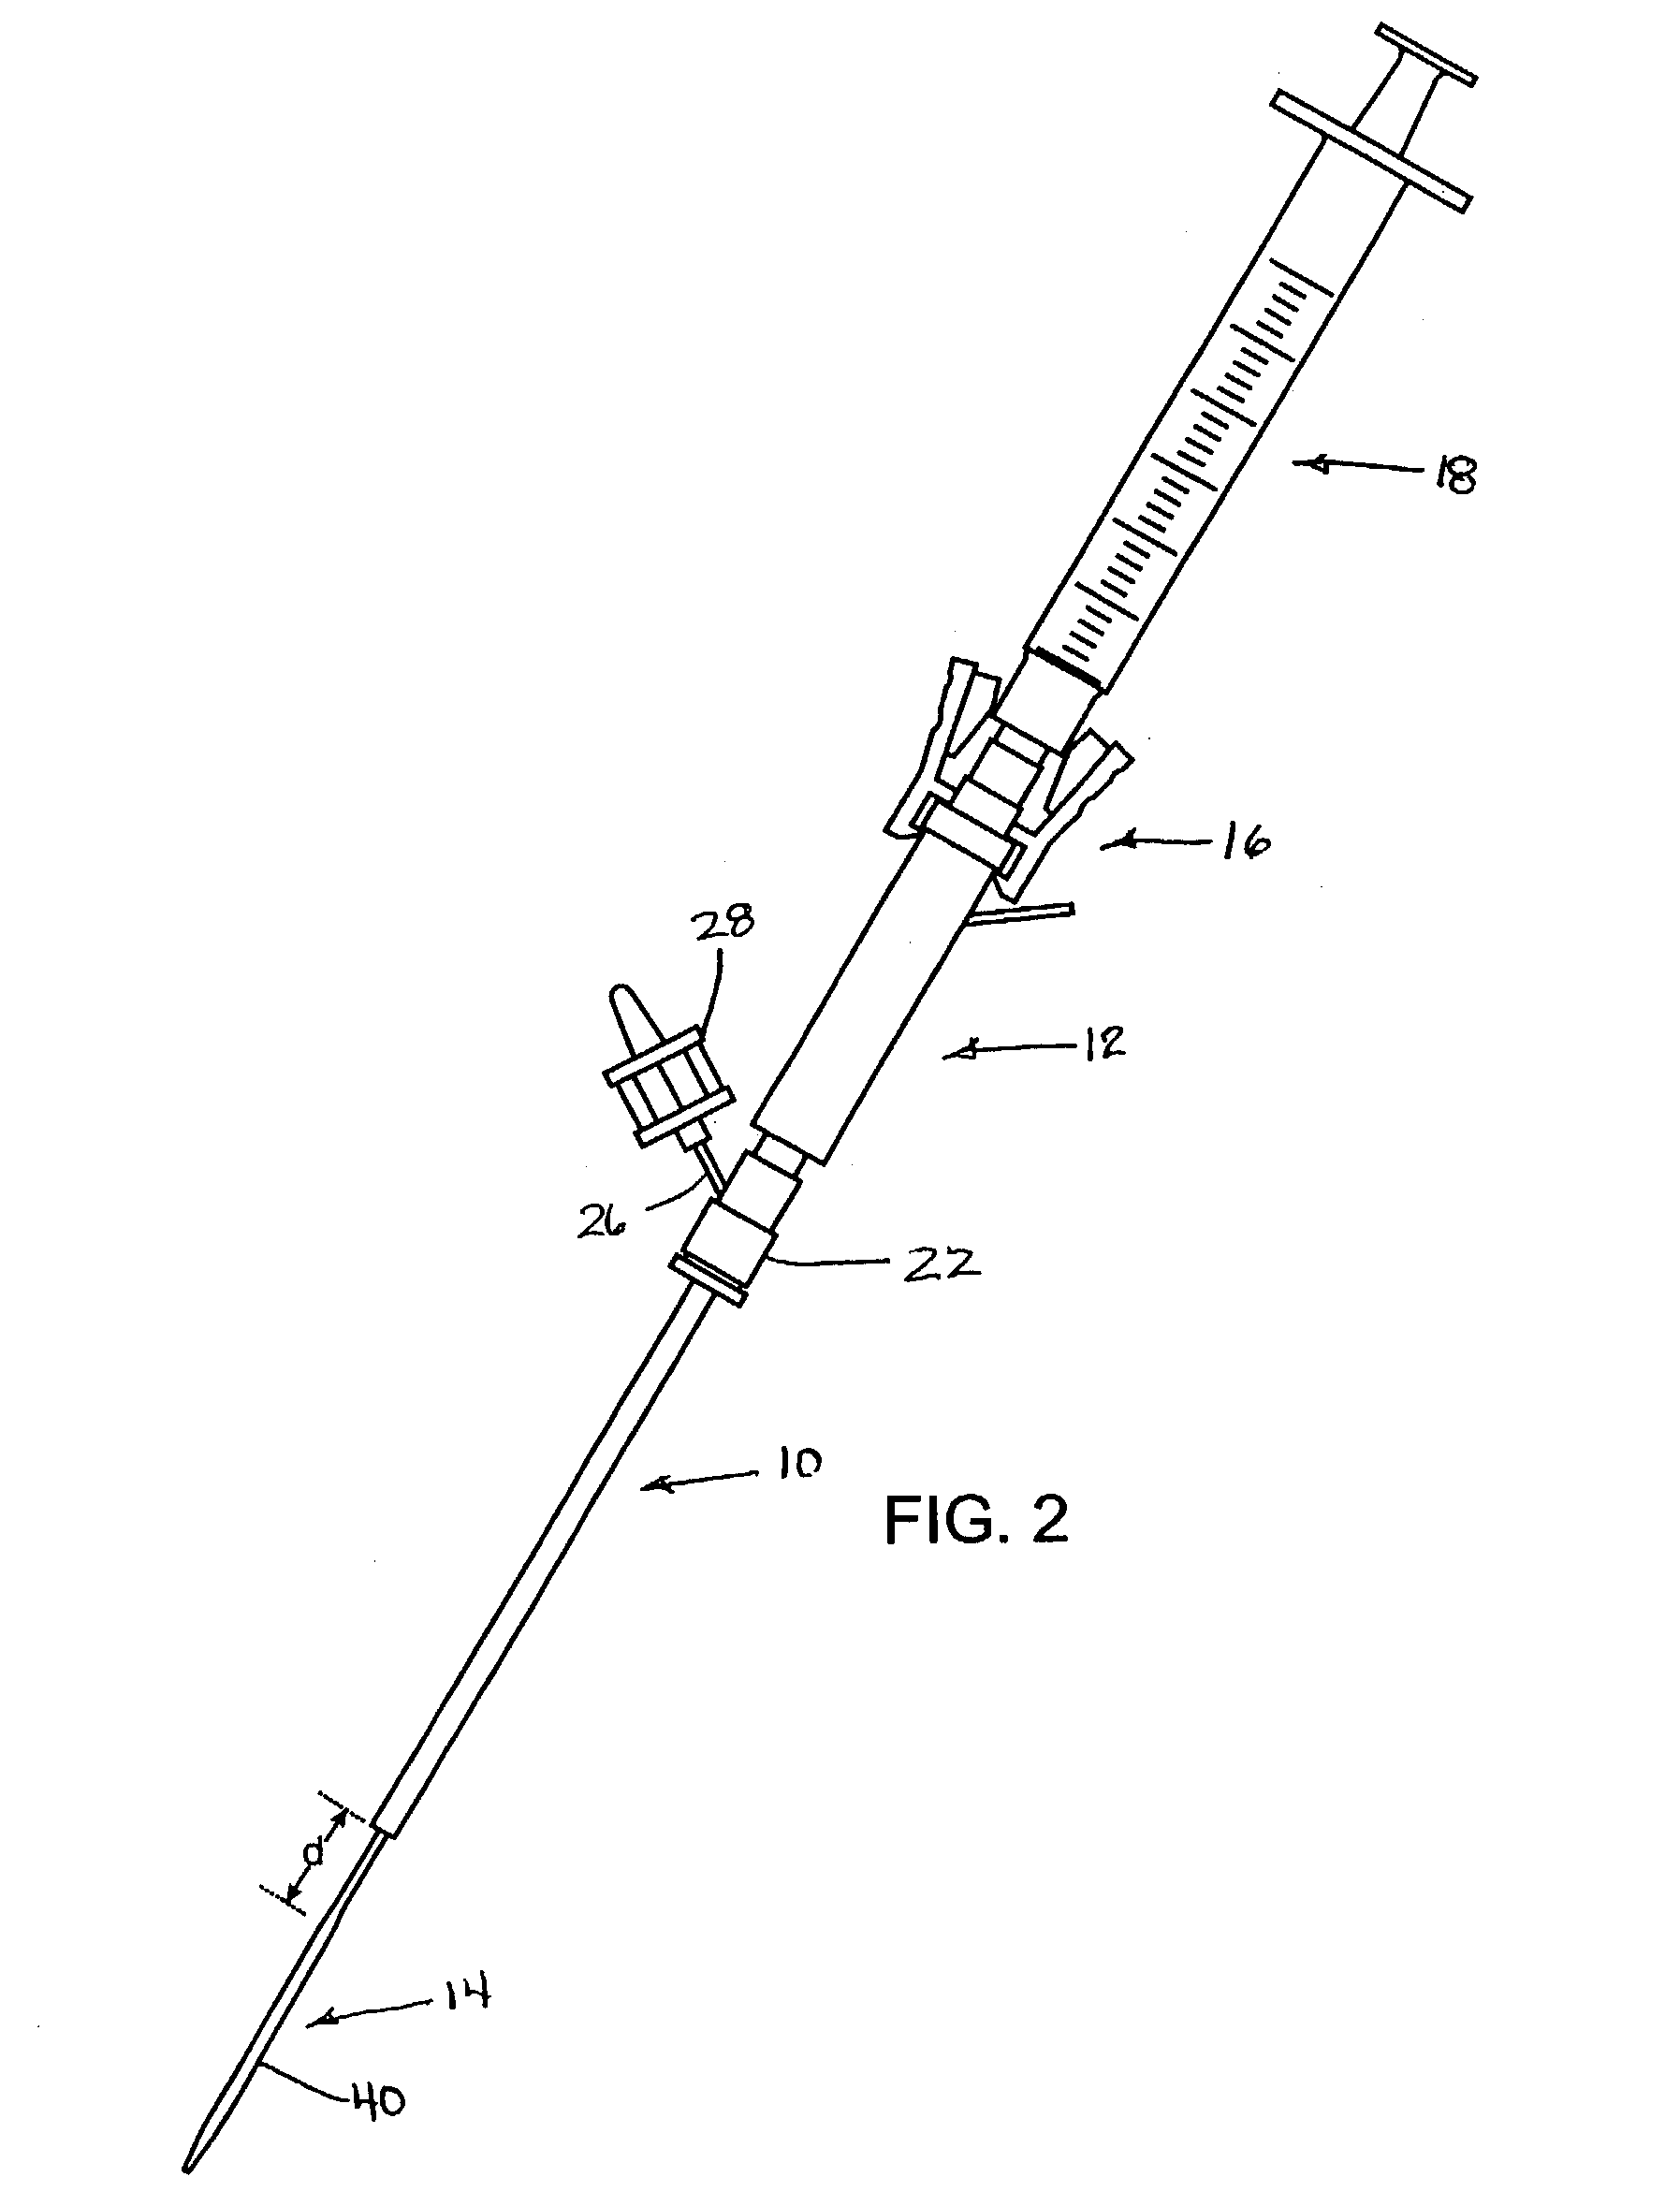 System and method for delivering hemostasis promoting material to a blood vessel puncture site